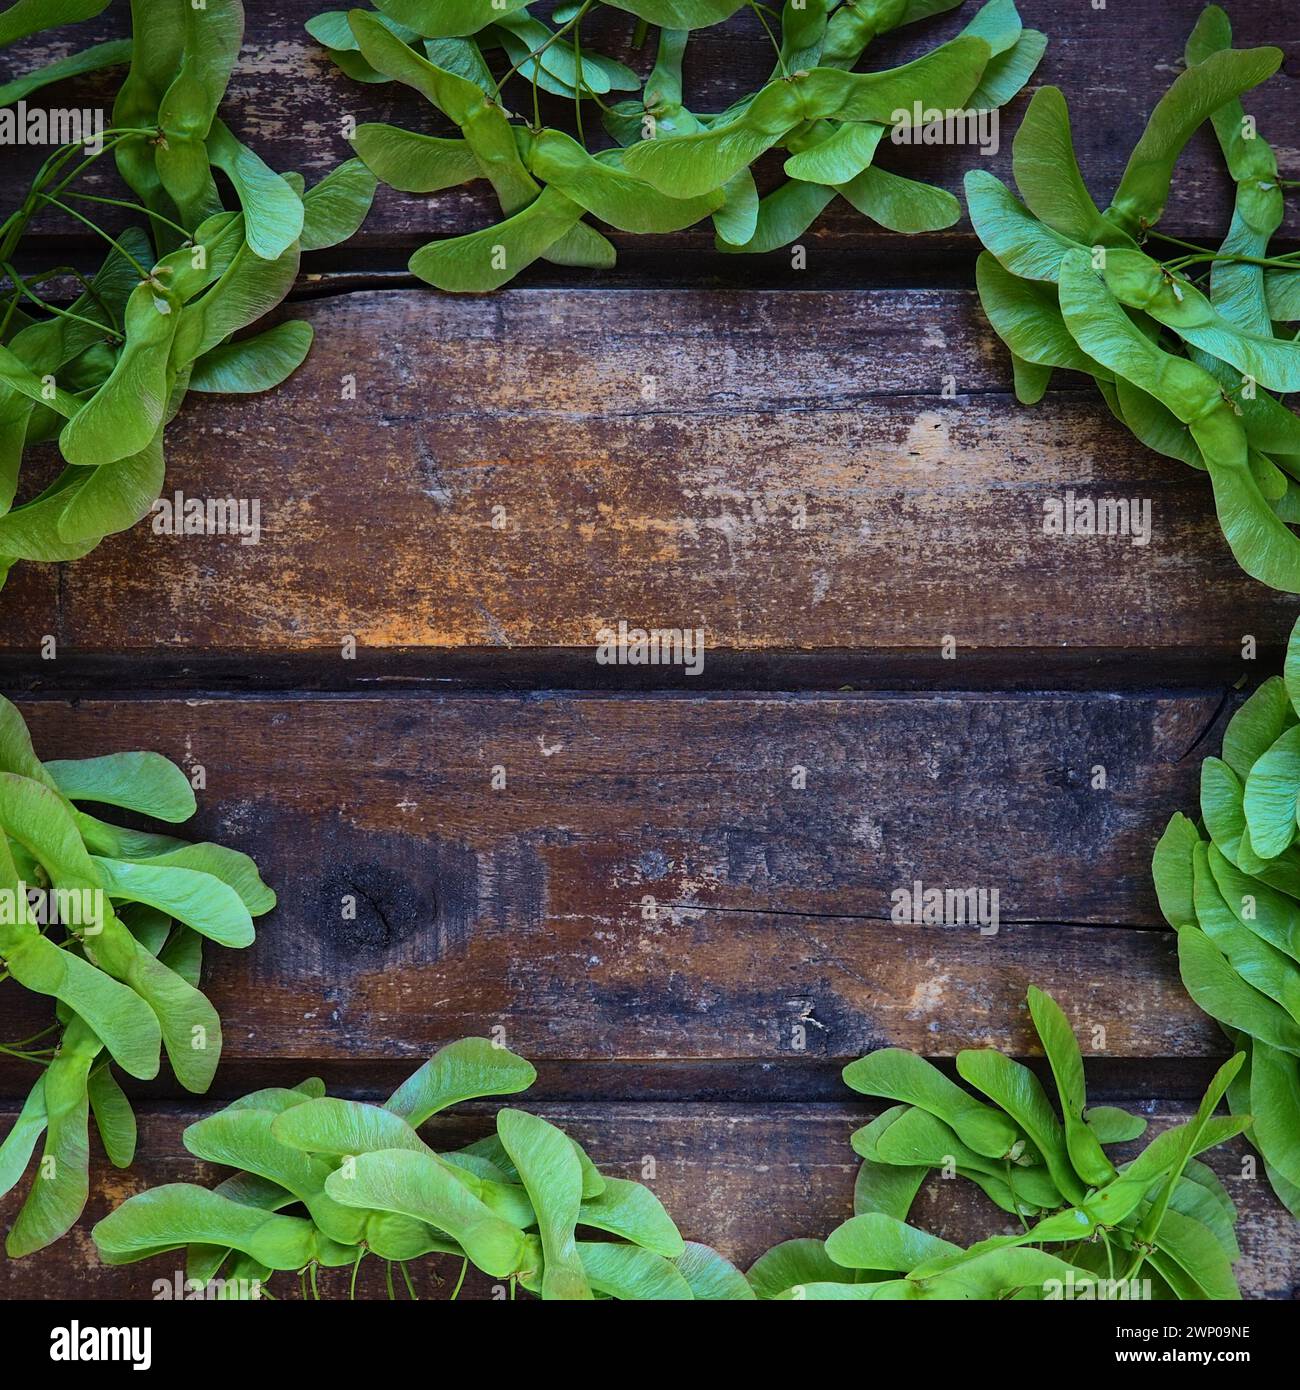 Green maple seeds along the edges of a wooden background made of horizontal planks. Frame or blank for text. Free space for text. copyspace. flat lay Stock Photo